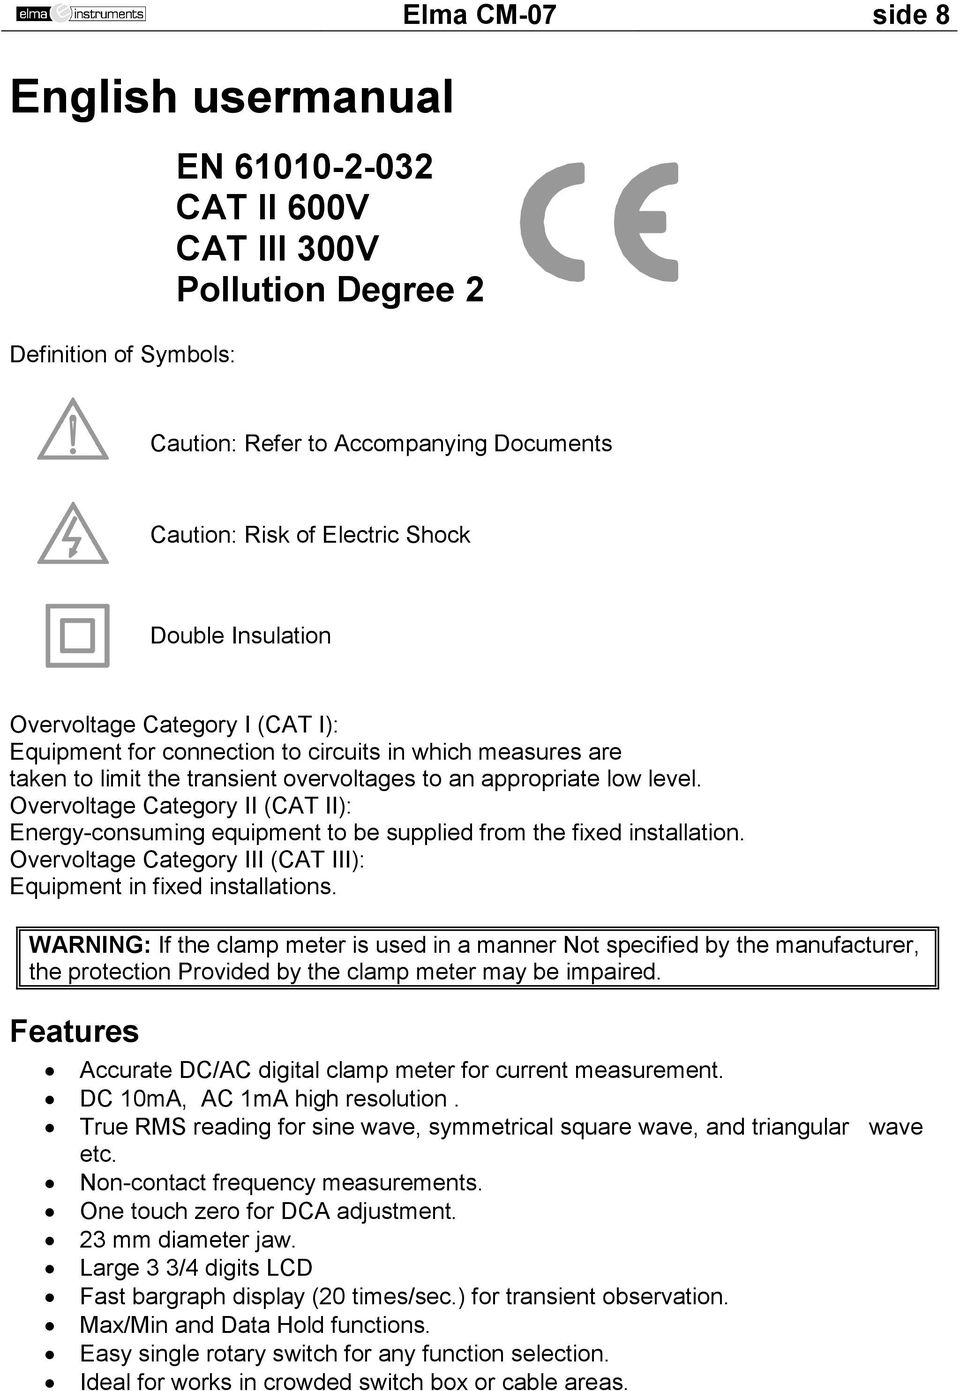 Overvoltage Category II (CAT II): Energy-consuming equipment to be supplied from the fixed installation. Overvoltage Category III (CAT III): Equipment in fixed installations.